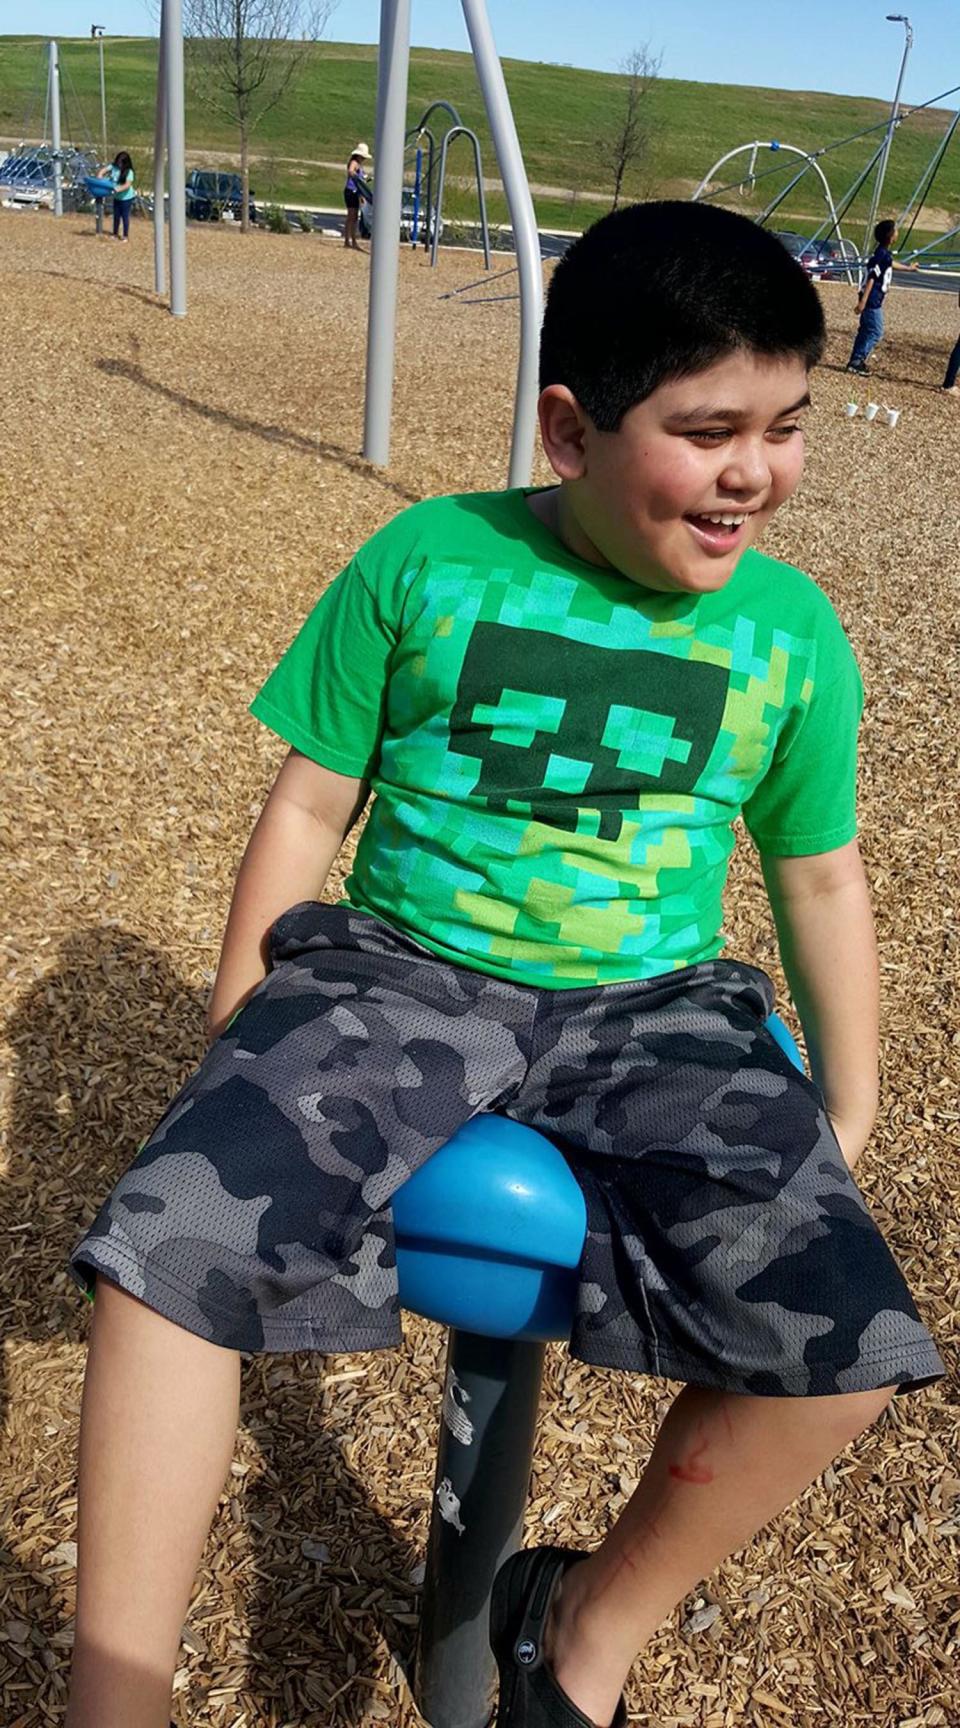 "What autism looks like to me: My baby. My world.&nbsp;Making me proud every day. He may never get the chance to tell me in words how he feels or how his day was. But I will understand him regardless, and I will help him understand the world."